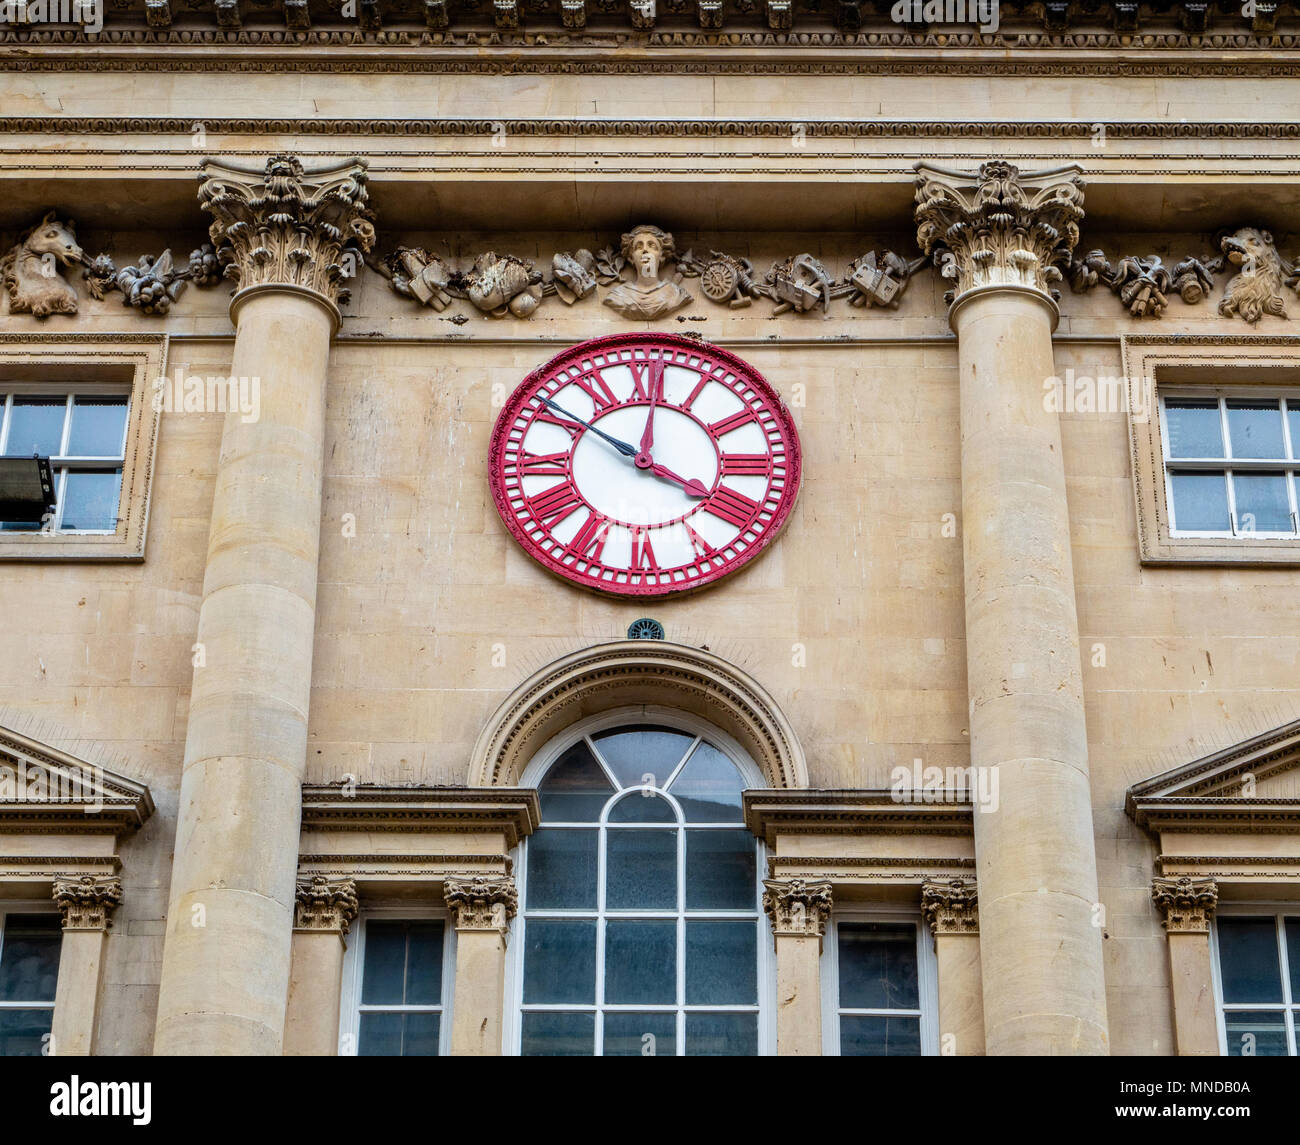 Clock on the face of the Corn Exchange building Bristol which has two minute hands - one showing GMT and the other old Bristol time ten minutes later Stock Photo